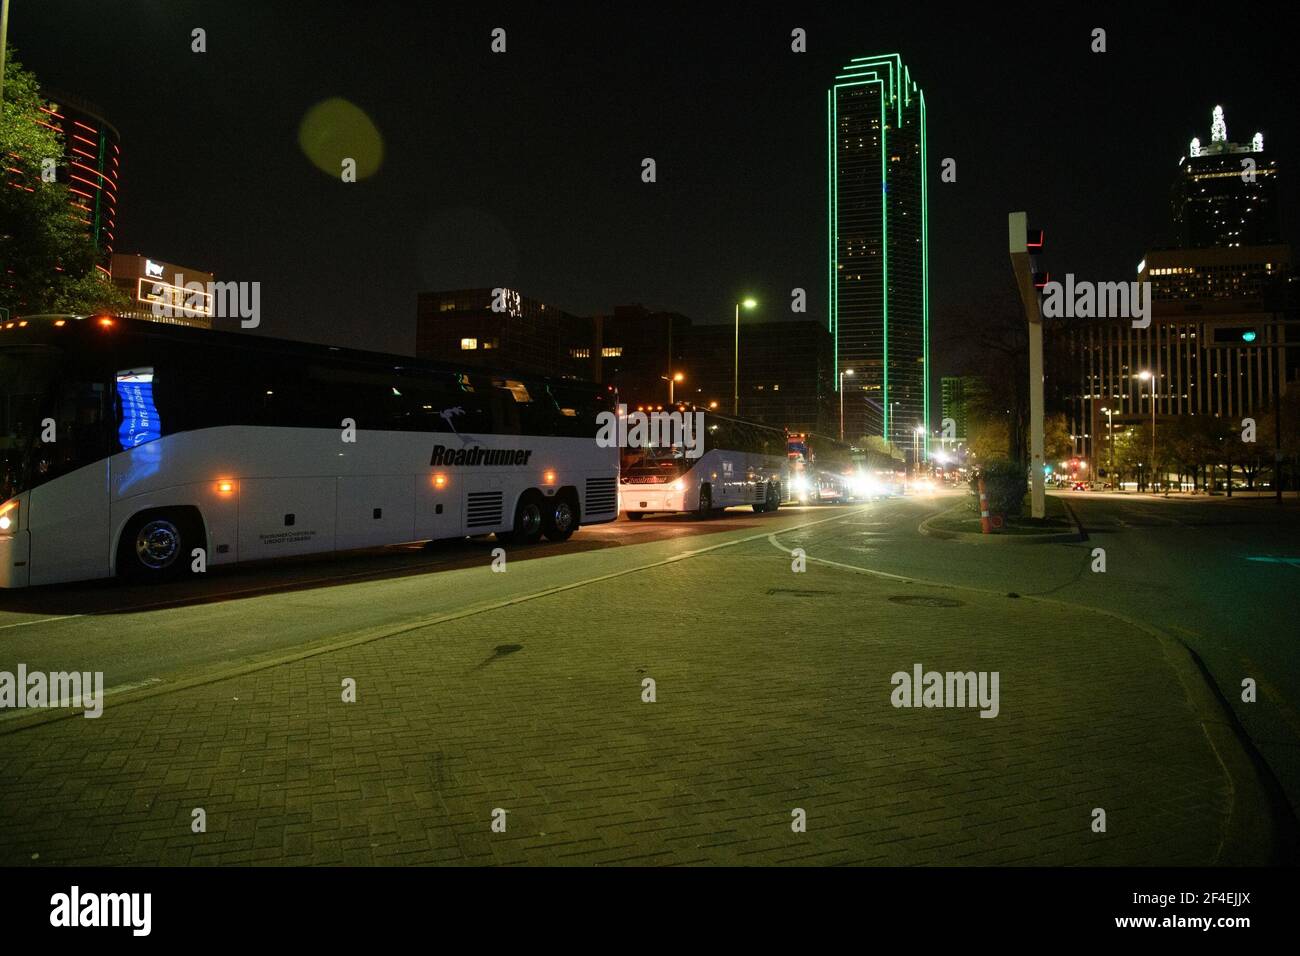 Dallas, Texas, USA. 20th Mar, 2021. Several charter buses carrying migrant teenagers arrived under Federal Protective Service escort to the Kay Bailey Hutchison Convention Center in Dallas on Saturday evening, March 21, 2021.The emergency intake site was opened Wednesday and is expected to hold nearly 3,000 teens, according to the Human and Health Services department. The site in Dallas and one in Midland TX have been opened to alleviate overcrowding at Border Patrol facilities and other HHS-run shelters.The current agreement is for 75 days and allows the use of space at the Kay Bailey Hutchi Stock Photo